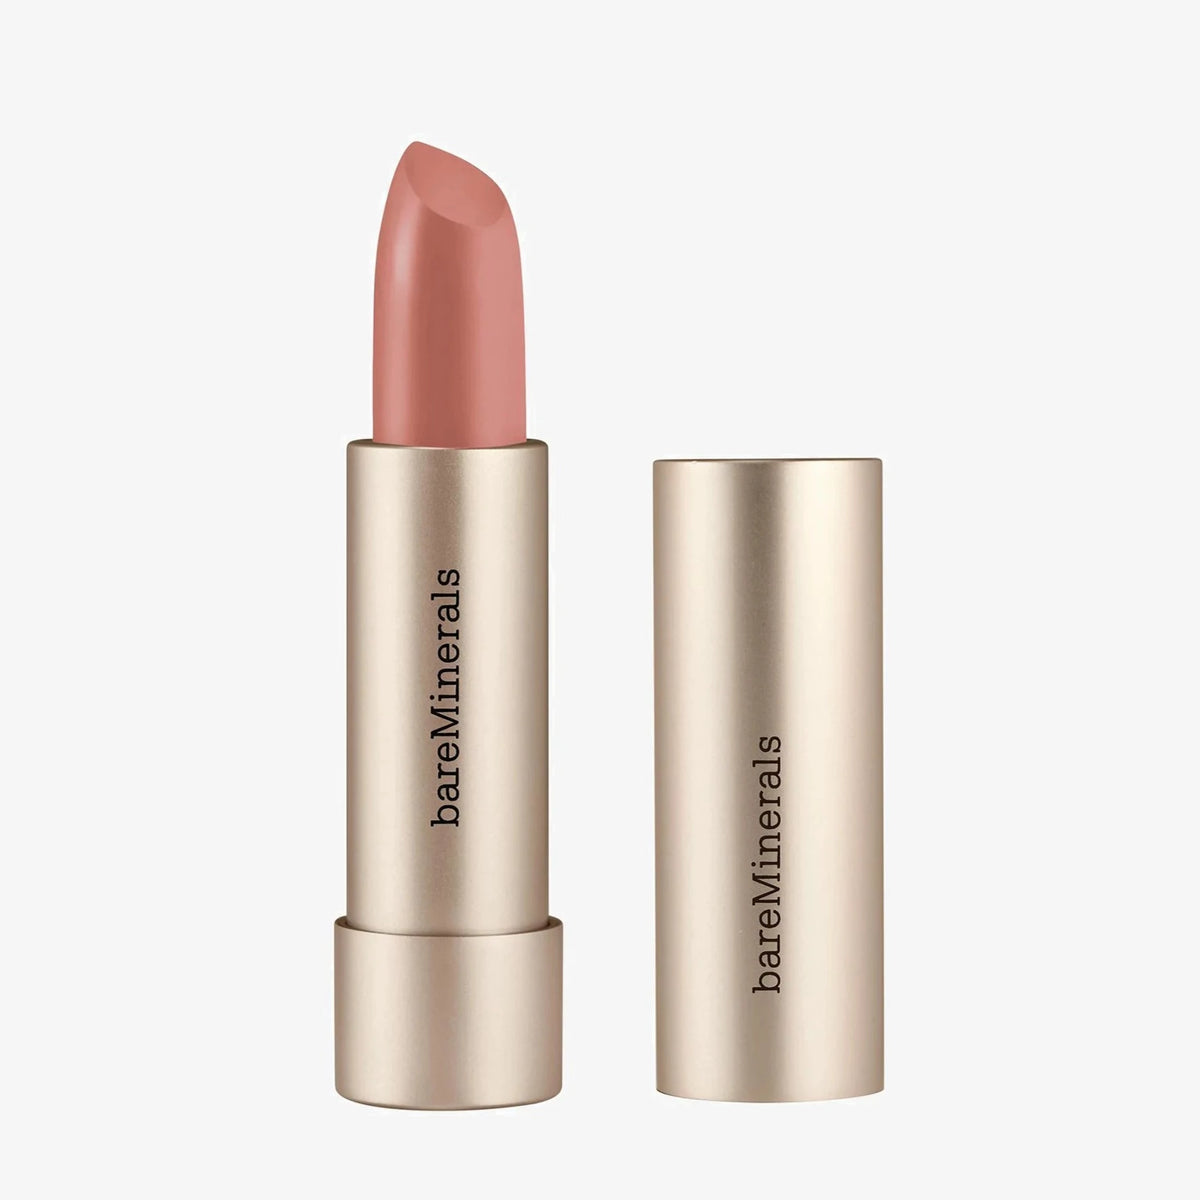 Rossetto Mineralist Hydra Smoothing bareMinerals - Insight